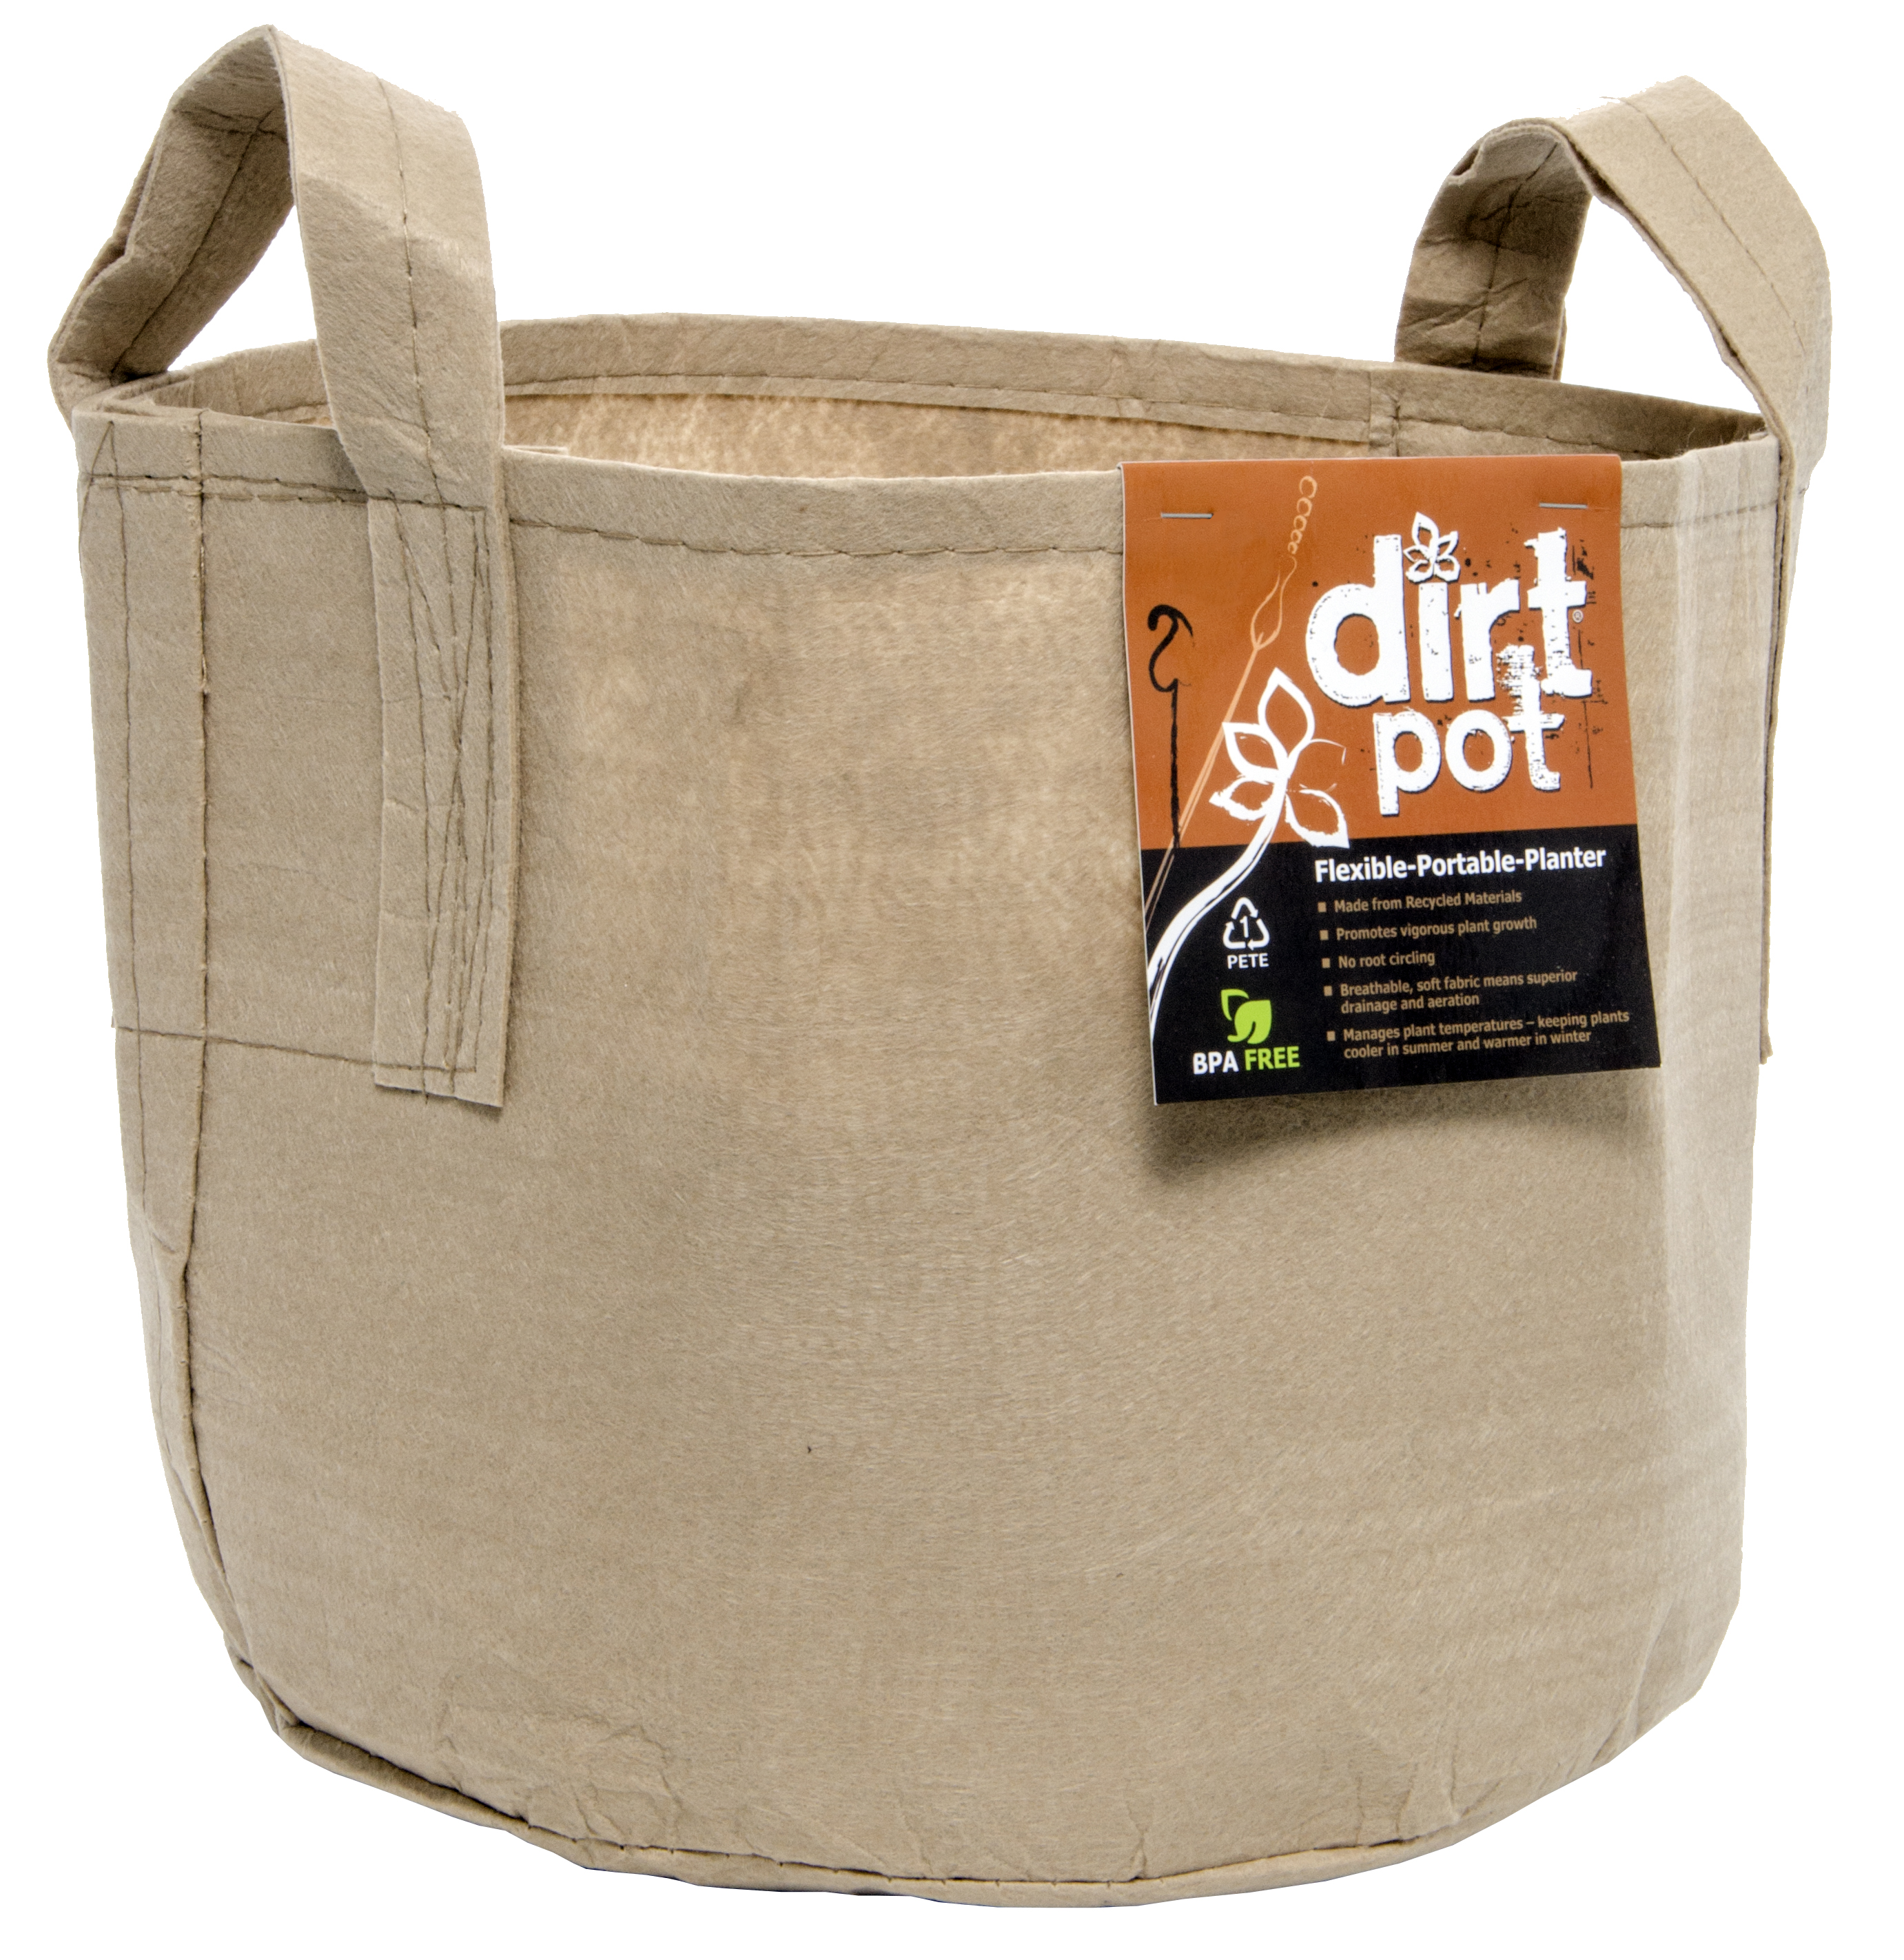 Picture for Dirt Pot Flexible Portable Planter, Tan, 25 gal, with handles